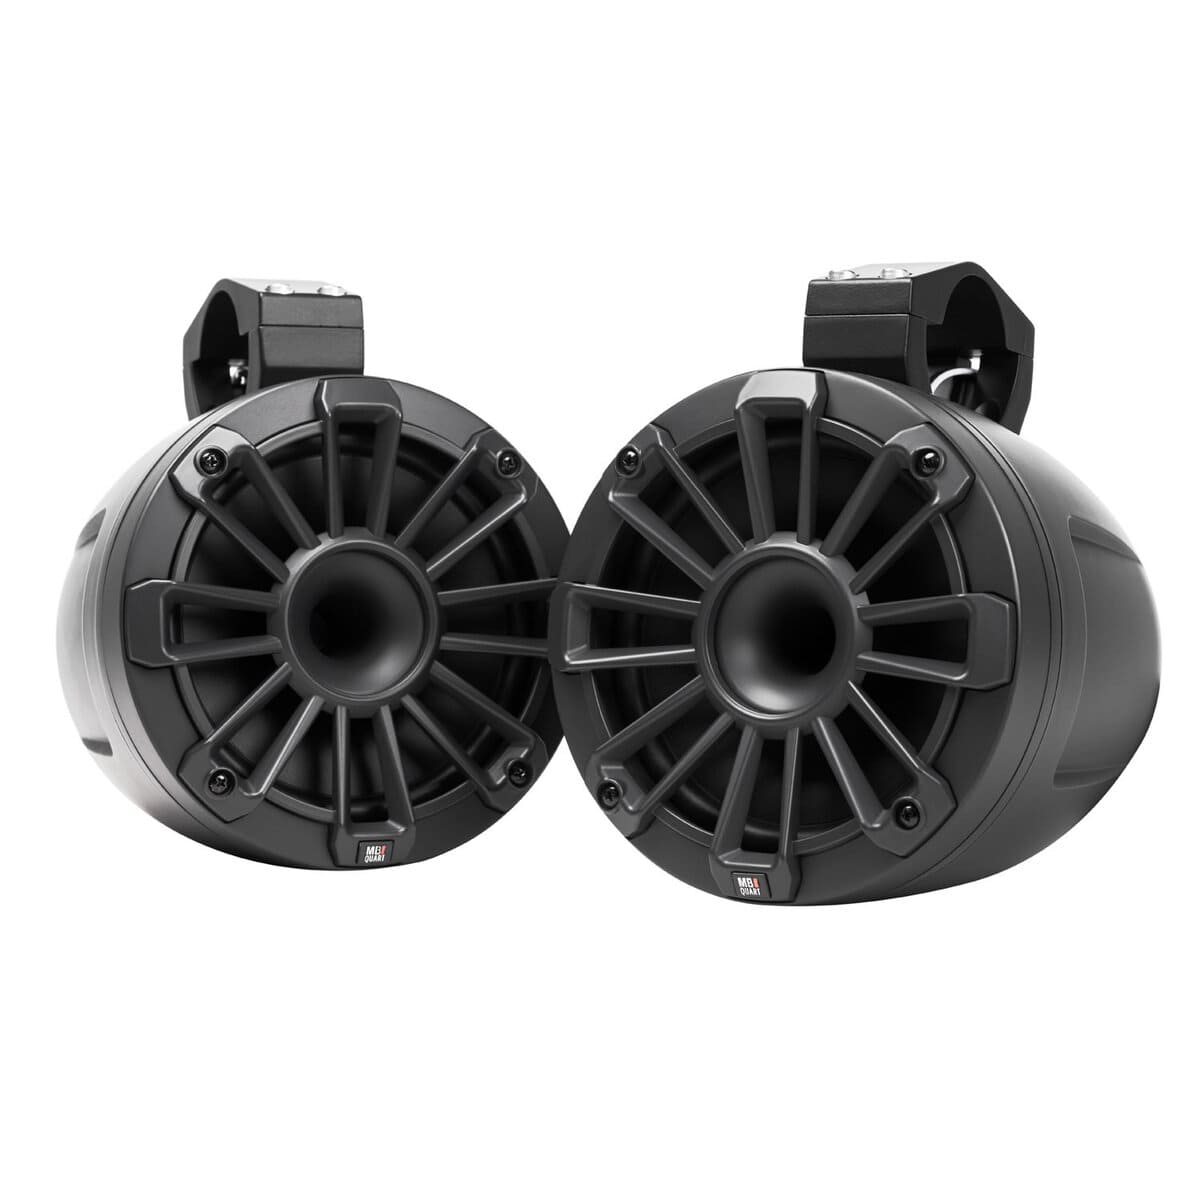 MB Quart NHT2-116 Nautic 6.5 Inch Compression Horn Tower Speakers